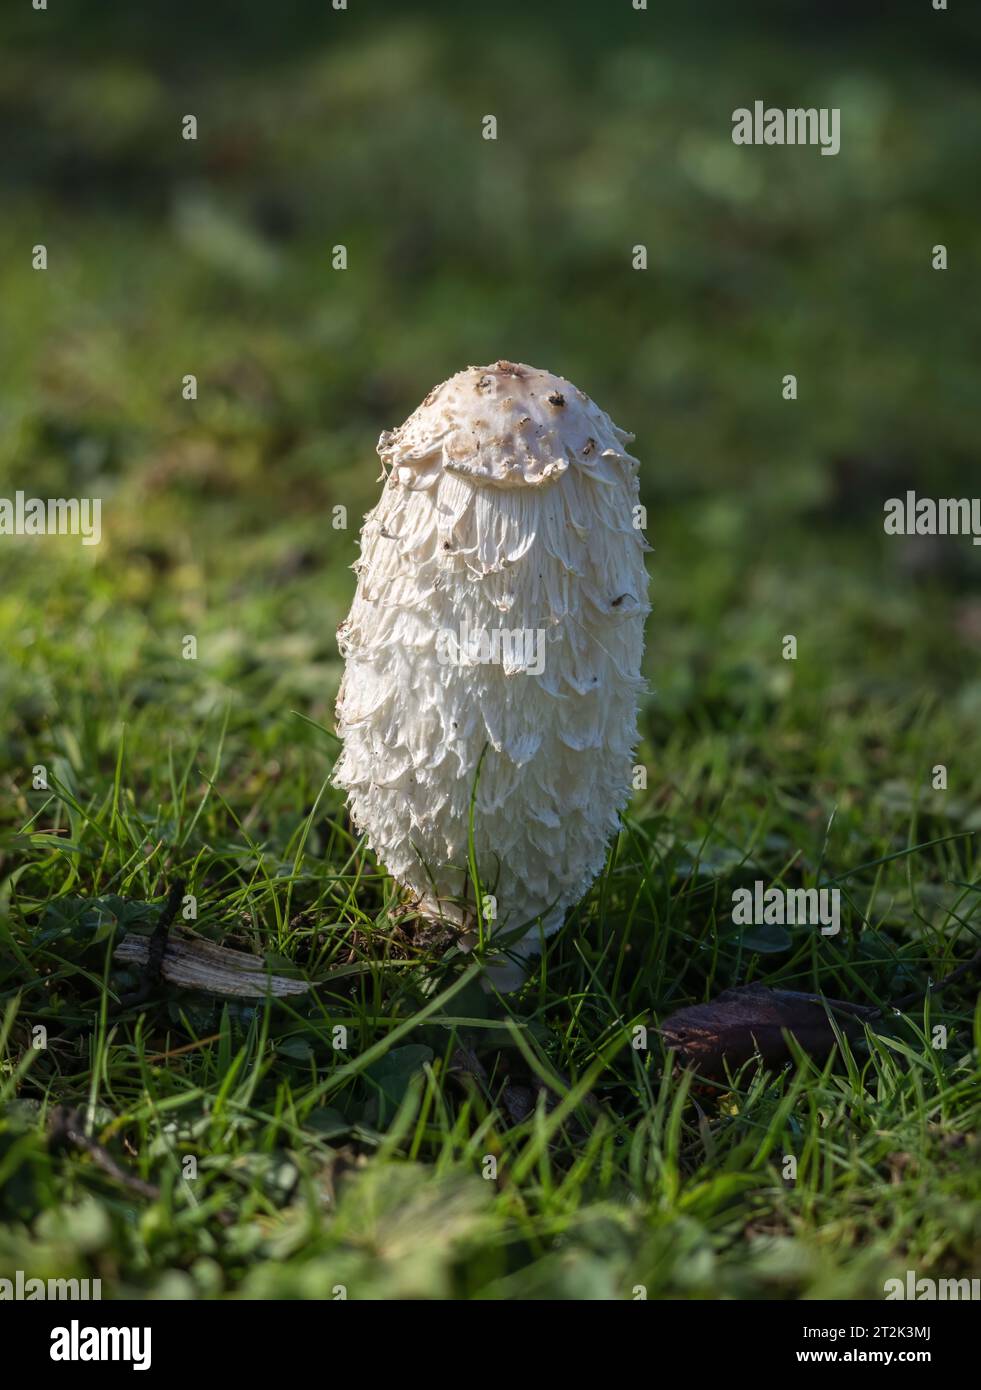 Shaggy Inkcap fungus just about to open in Sussex countryside. Stock Photo